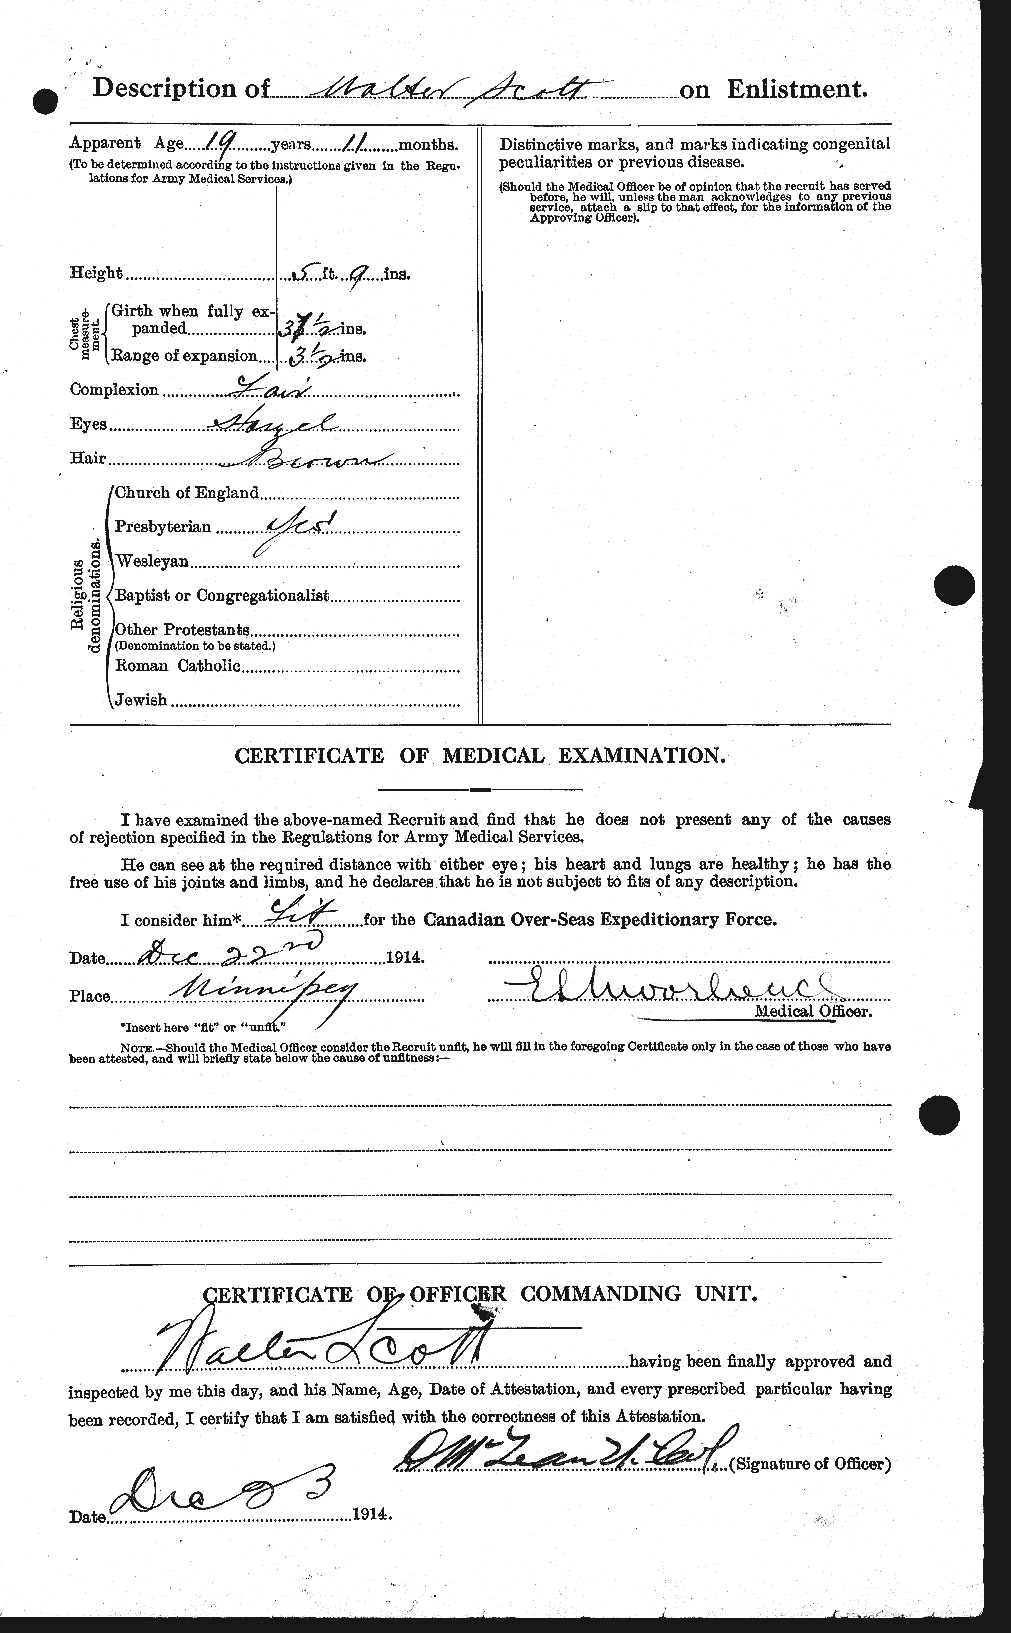 Personnel Records of the First World War - CEF 088187b